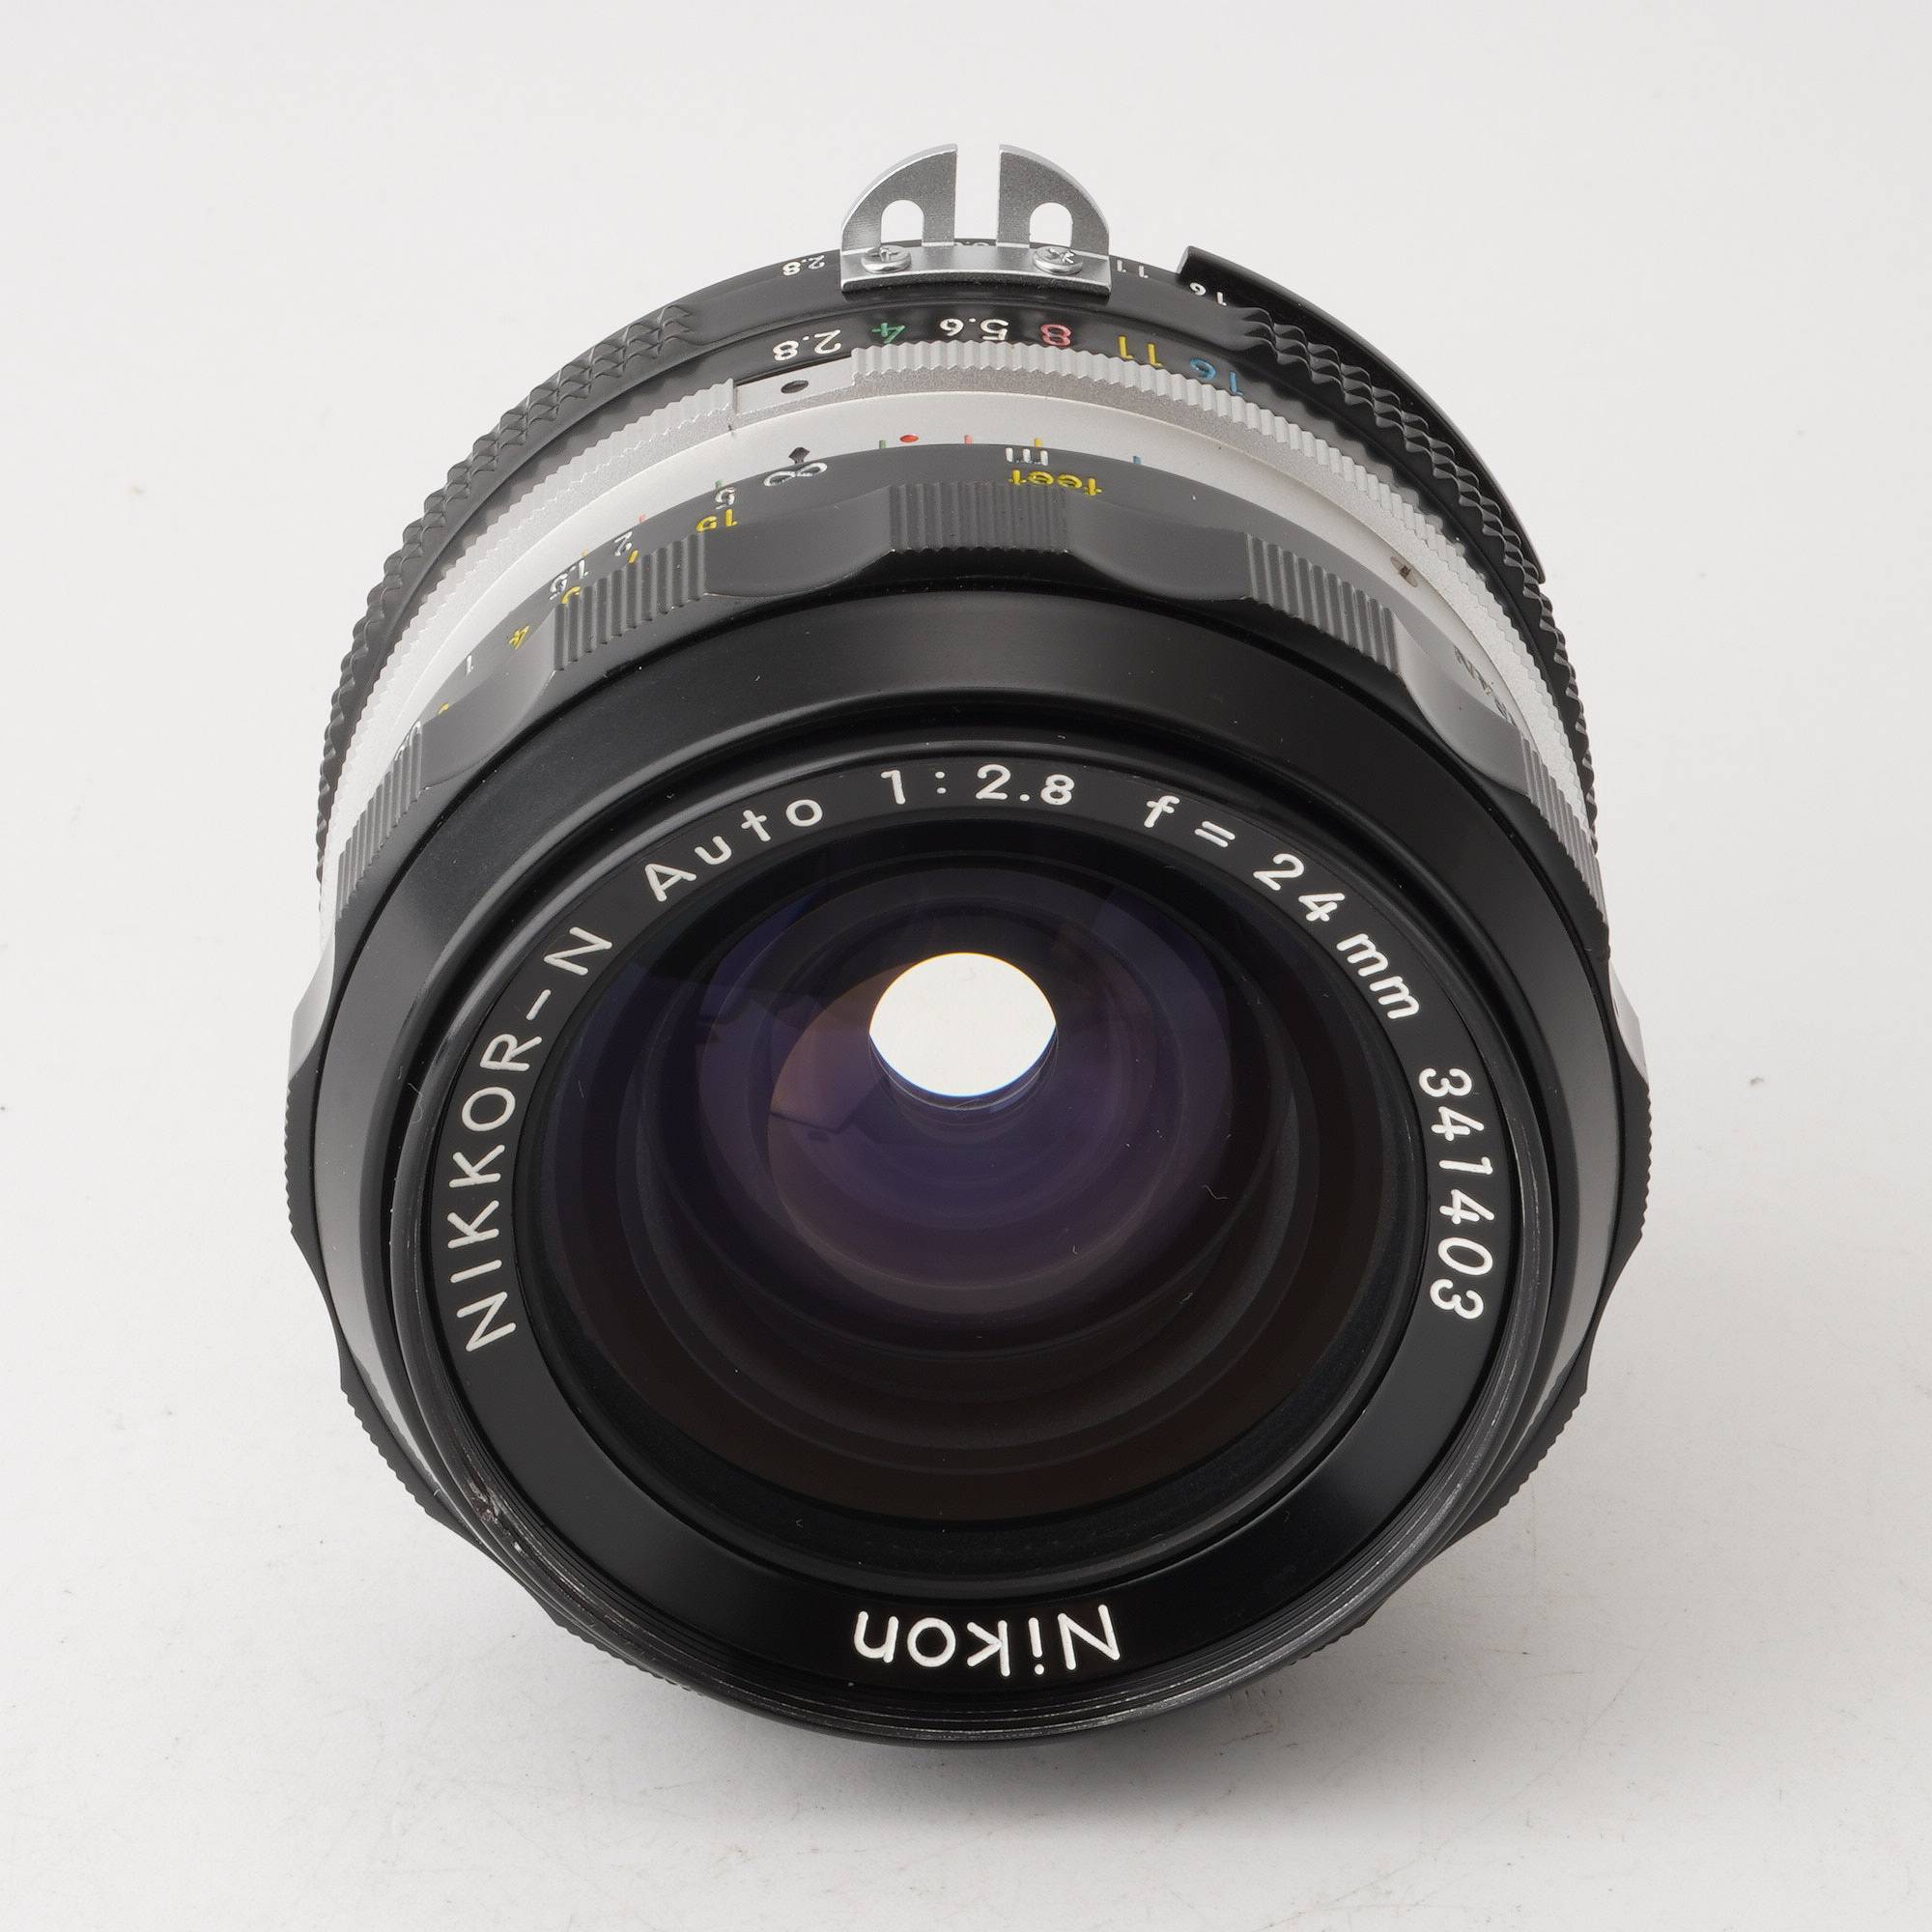 Nikon ニコン NIKKOR-N Auto 24mm f/2.8 Ai改-